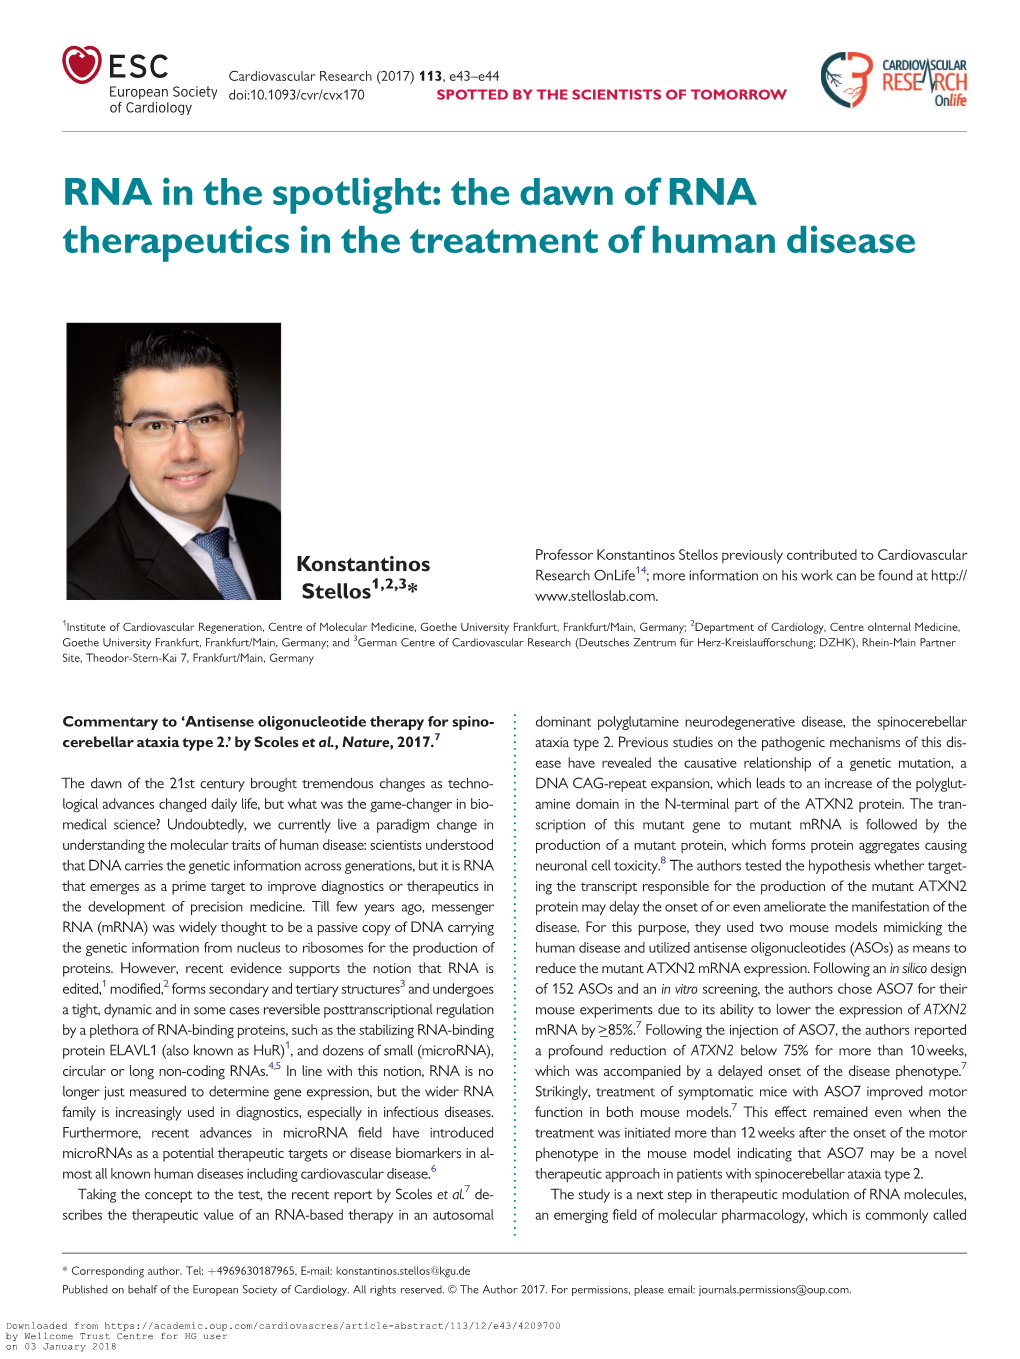 RNA in the Spotlight: the Dawn of RNA Therapeutics in the Treatment of Human Disease